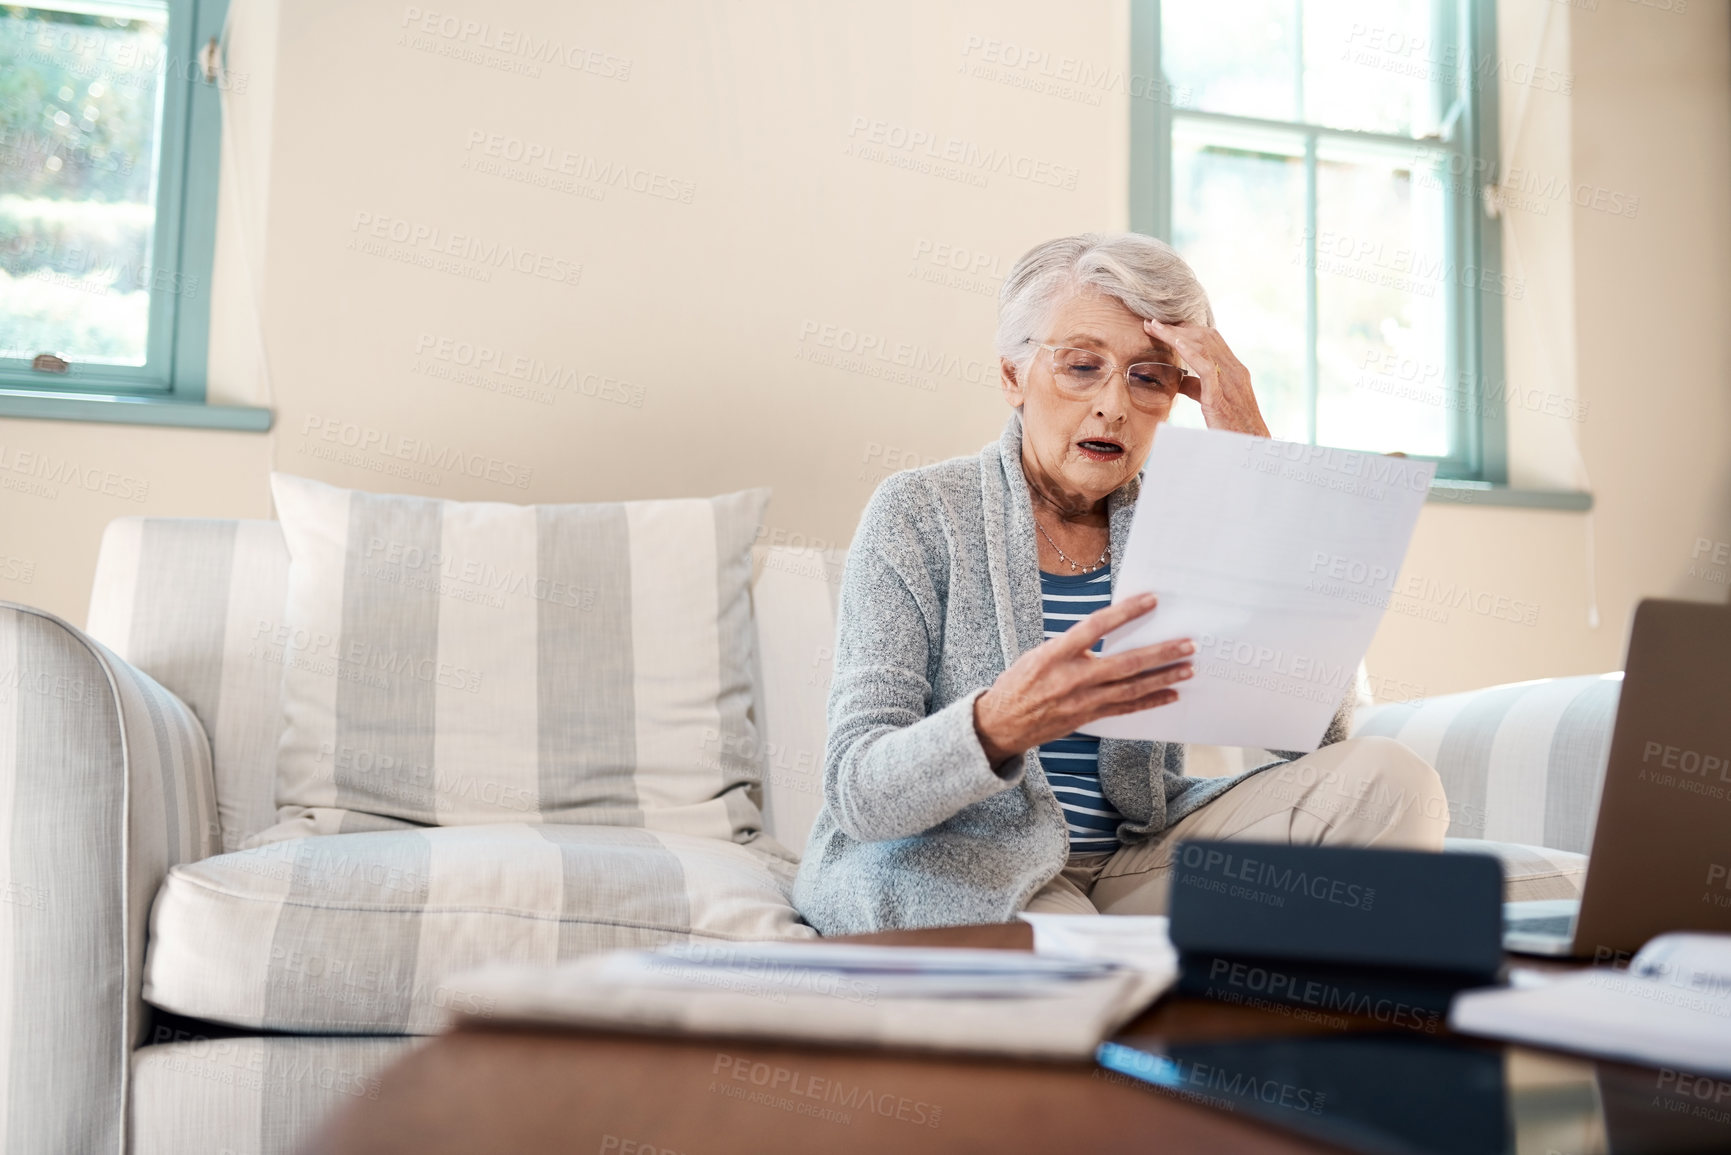 Buy stock photo Shot of a senior woman looking shocked while going through paperwork at home